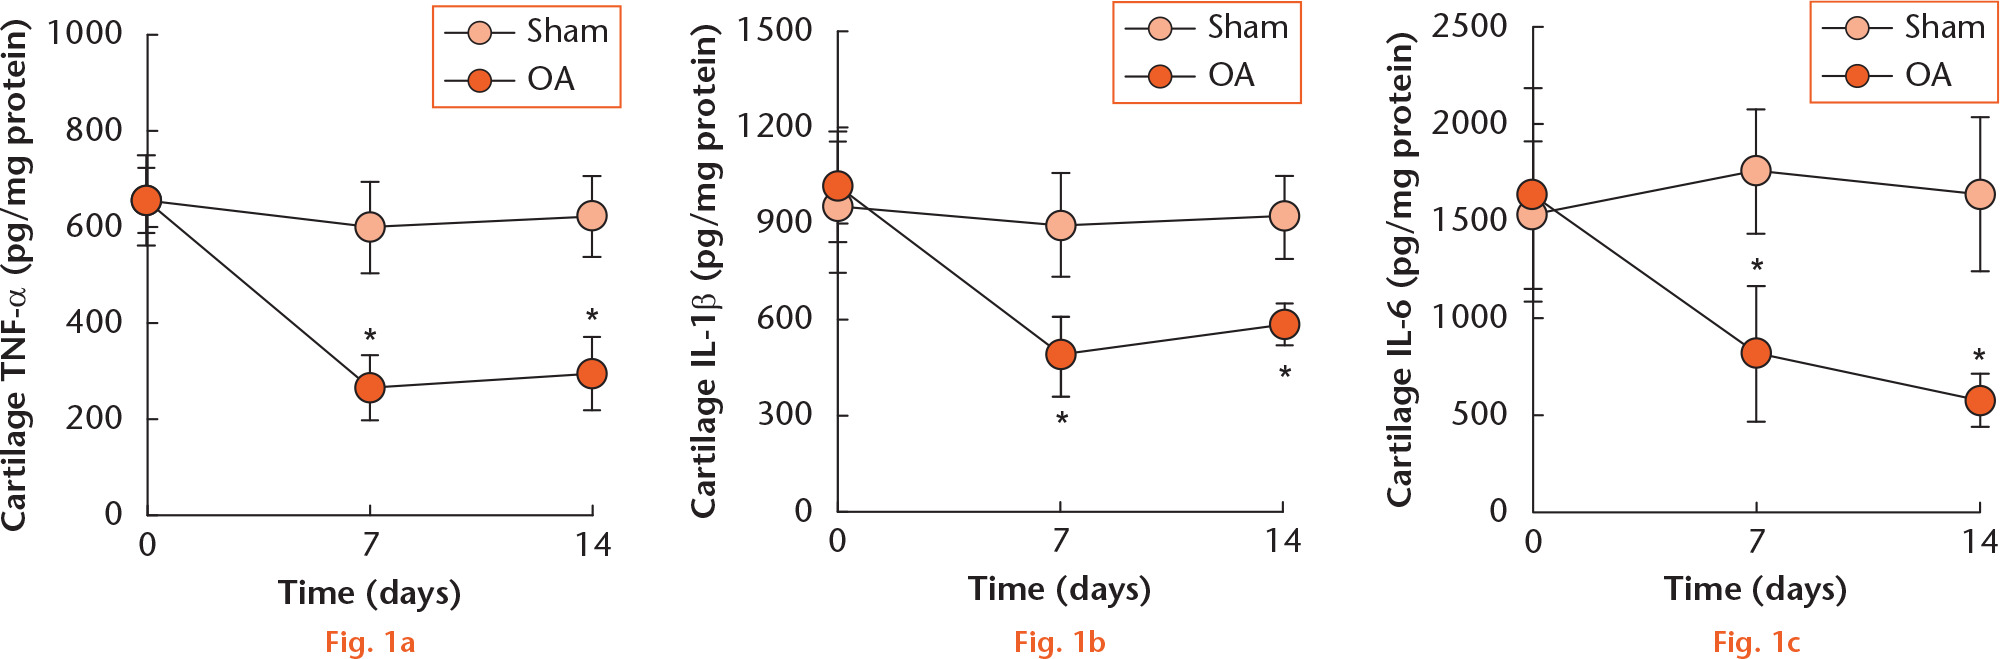  
            Time course study of meniscectomy-induced cartilage nitric oxide production in rats. Rats were divided into two groups of five. Group I (Sham group), rats received the sham operation only; and Group II (OA group) rats received the meniscectomy operation only. Cartilage nitrite (a marker for nitric oxide production) was assessed 0, 7, and 14 days after the sham or meniscectomy operation. Data are expressed as means and standard deviation. *p < 0.05 compared with Sham group (Group I).
          